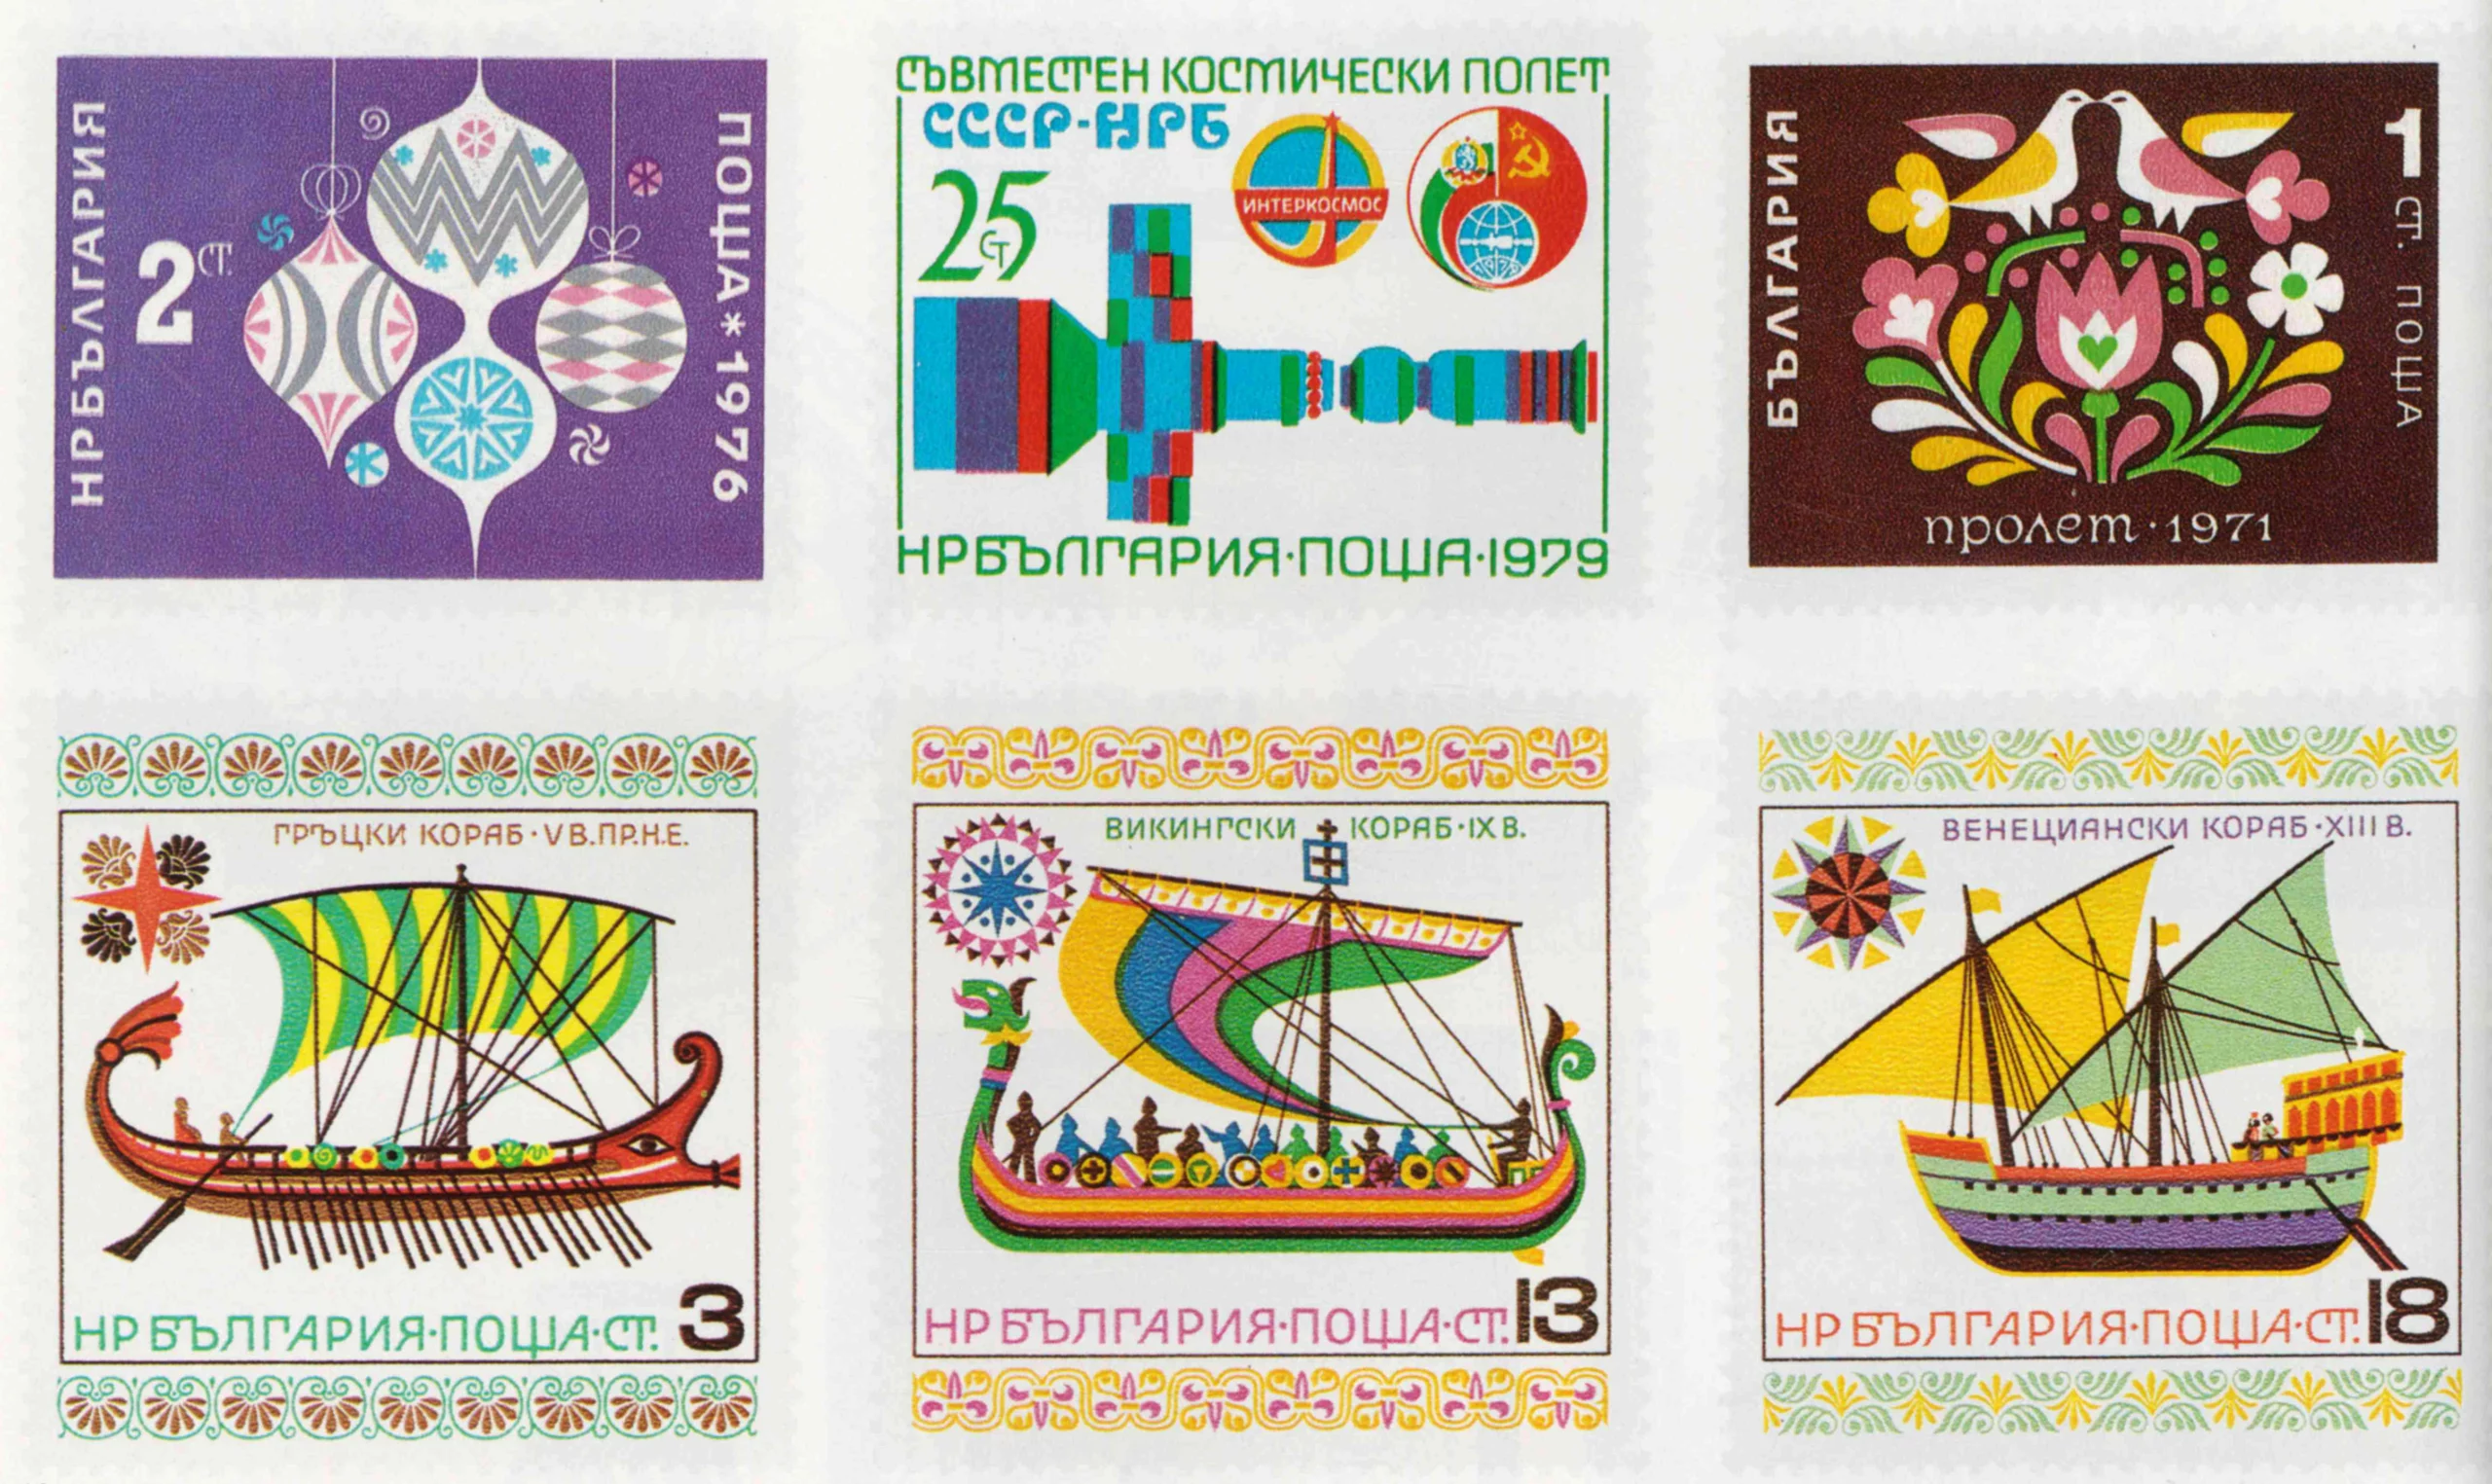 Postage stamps designed by Stephan Kantscheff. Scanned from Idea 170, 1982